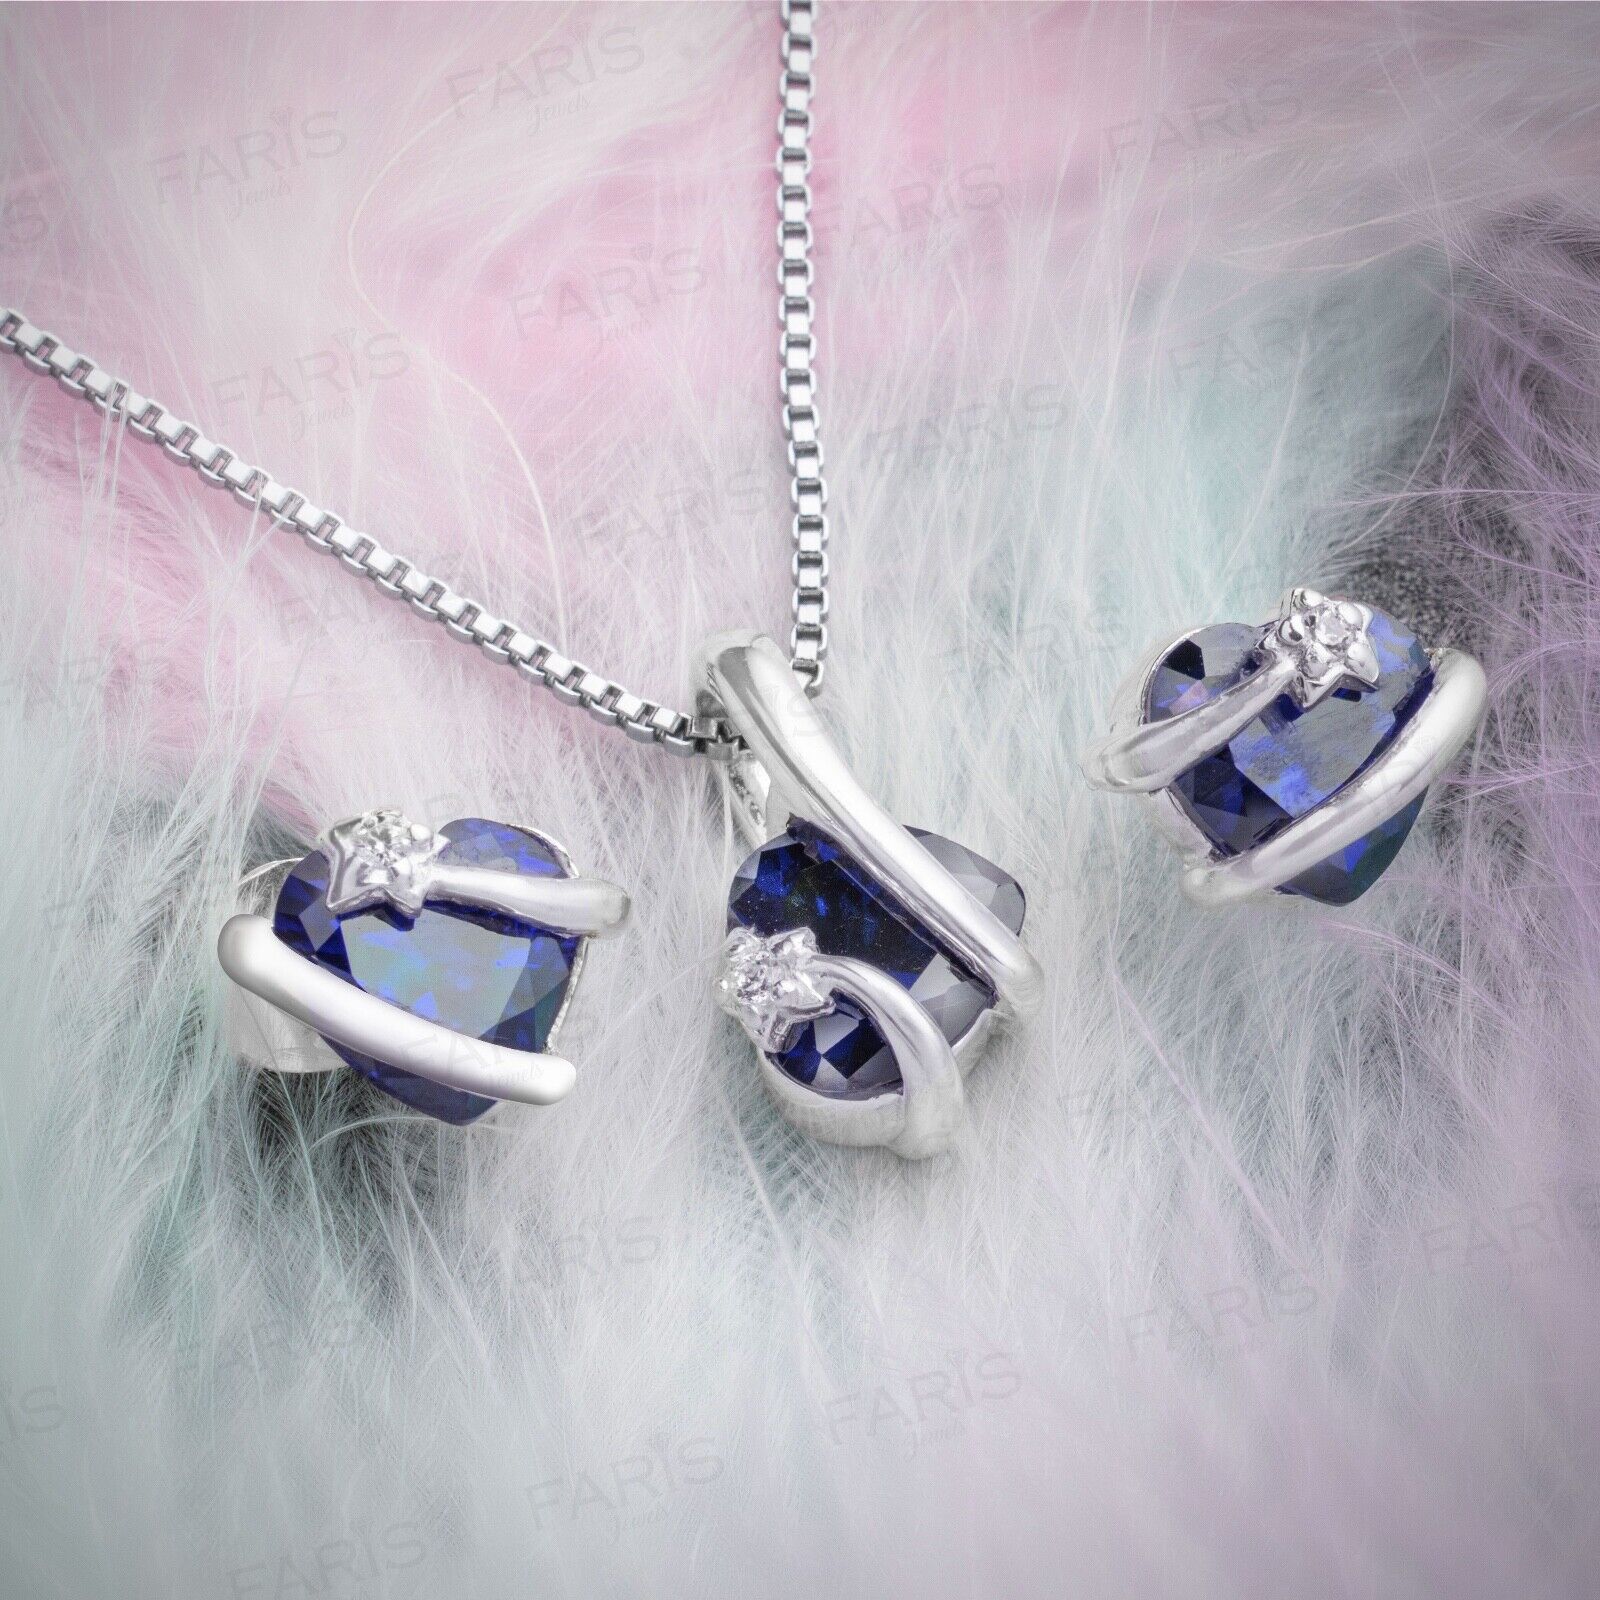 Blue Sapphire Gemstone Pendant and Earring Set Wrapped Heart Love Gift Jewellery